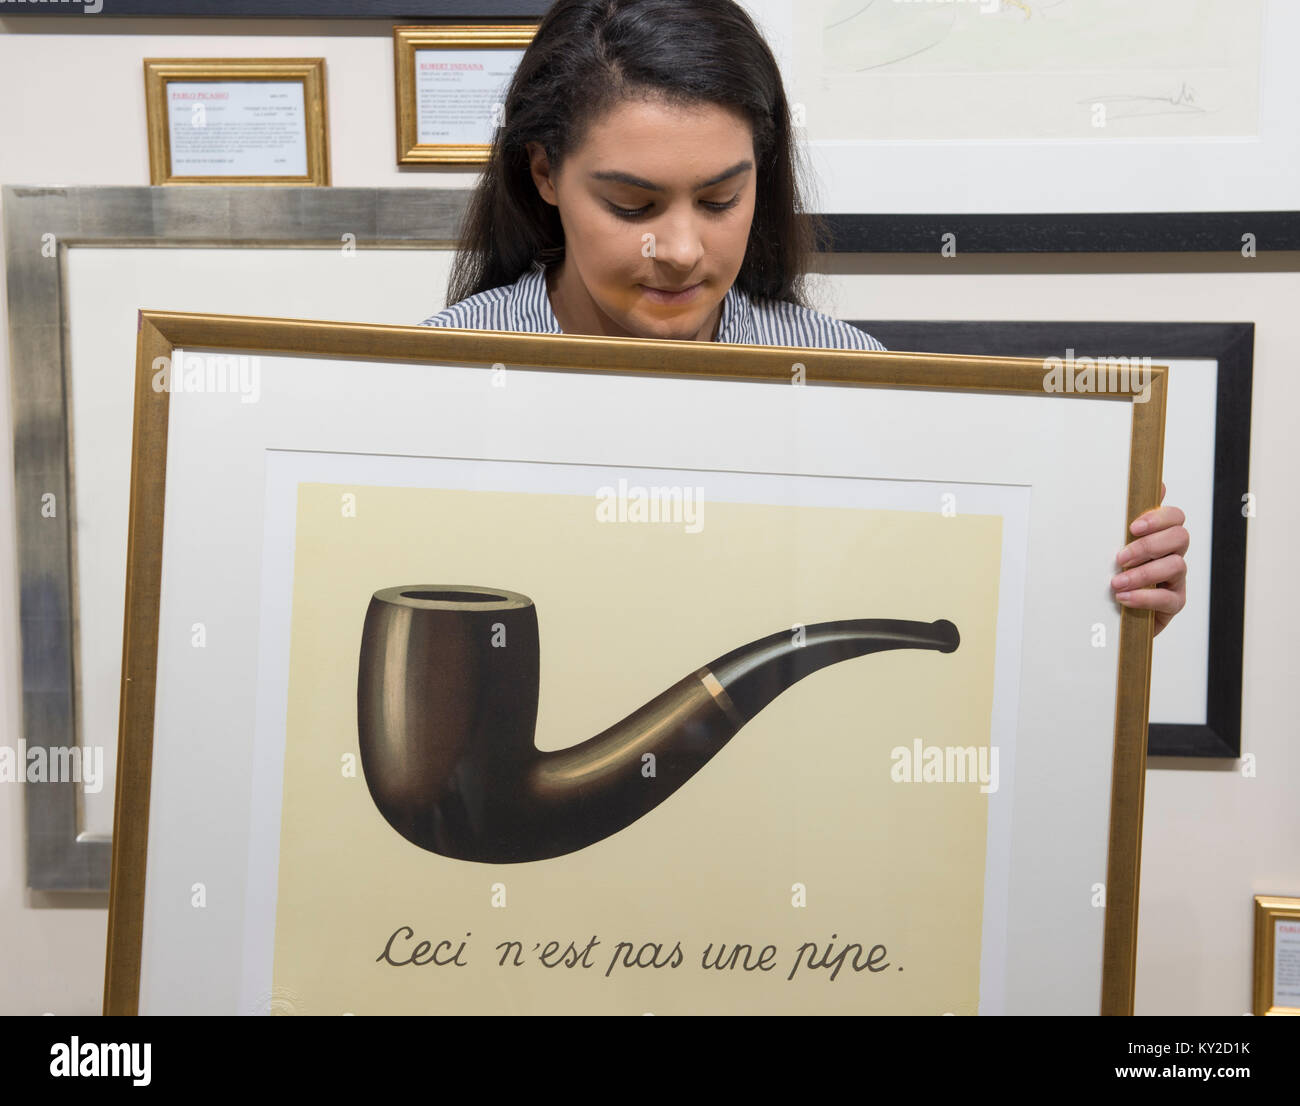 ExCel, London, UK. 12 January 2018. Behind the scenes, setting up the 3 day London Art, Antiques & Interiors Fair which brings together 60 specialist dealers showcasing over 30,000 unusual and desirable items from classic to contemporary. Member of exhibition staff examines a framed Rene Magritte lithograph. Credit: Malcolm Park/Alamy Live News. Stock Photo